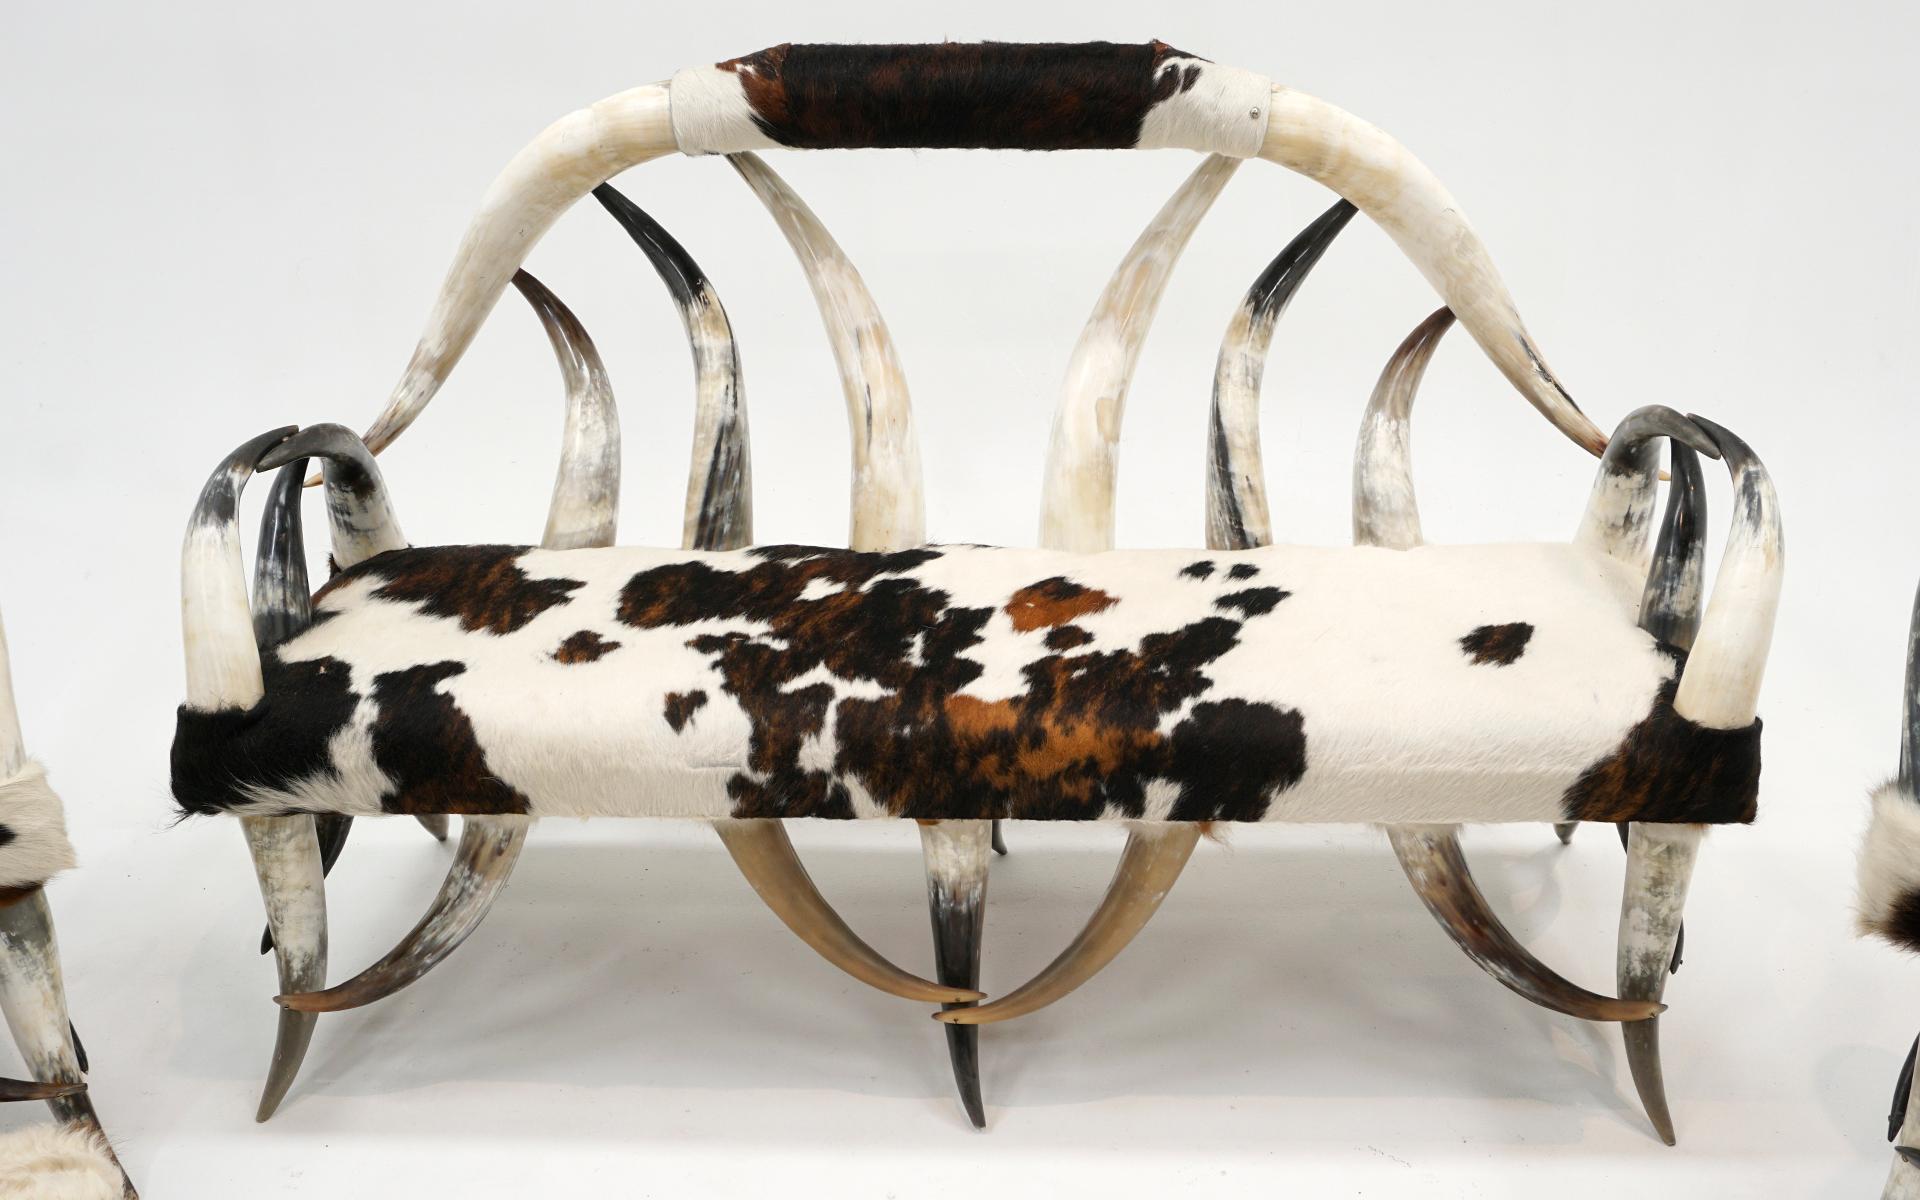 Late 19th Century Steer Horn Sofa, Two Chairs & Ottoman, Black, Brown & White Cowhide Upholstery  For Sale